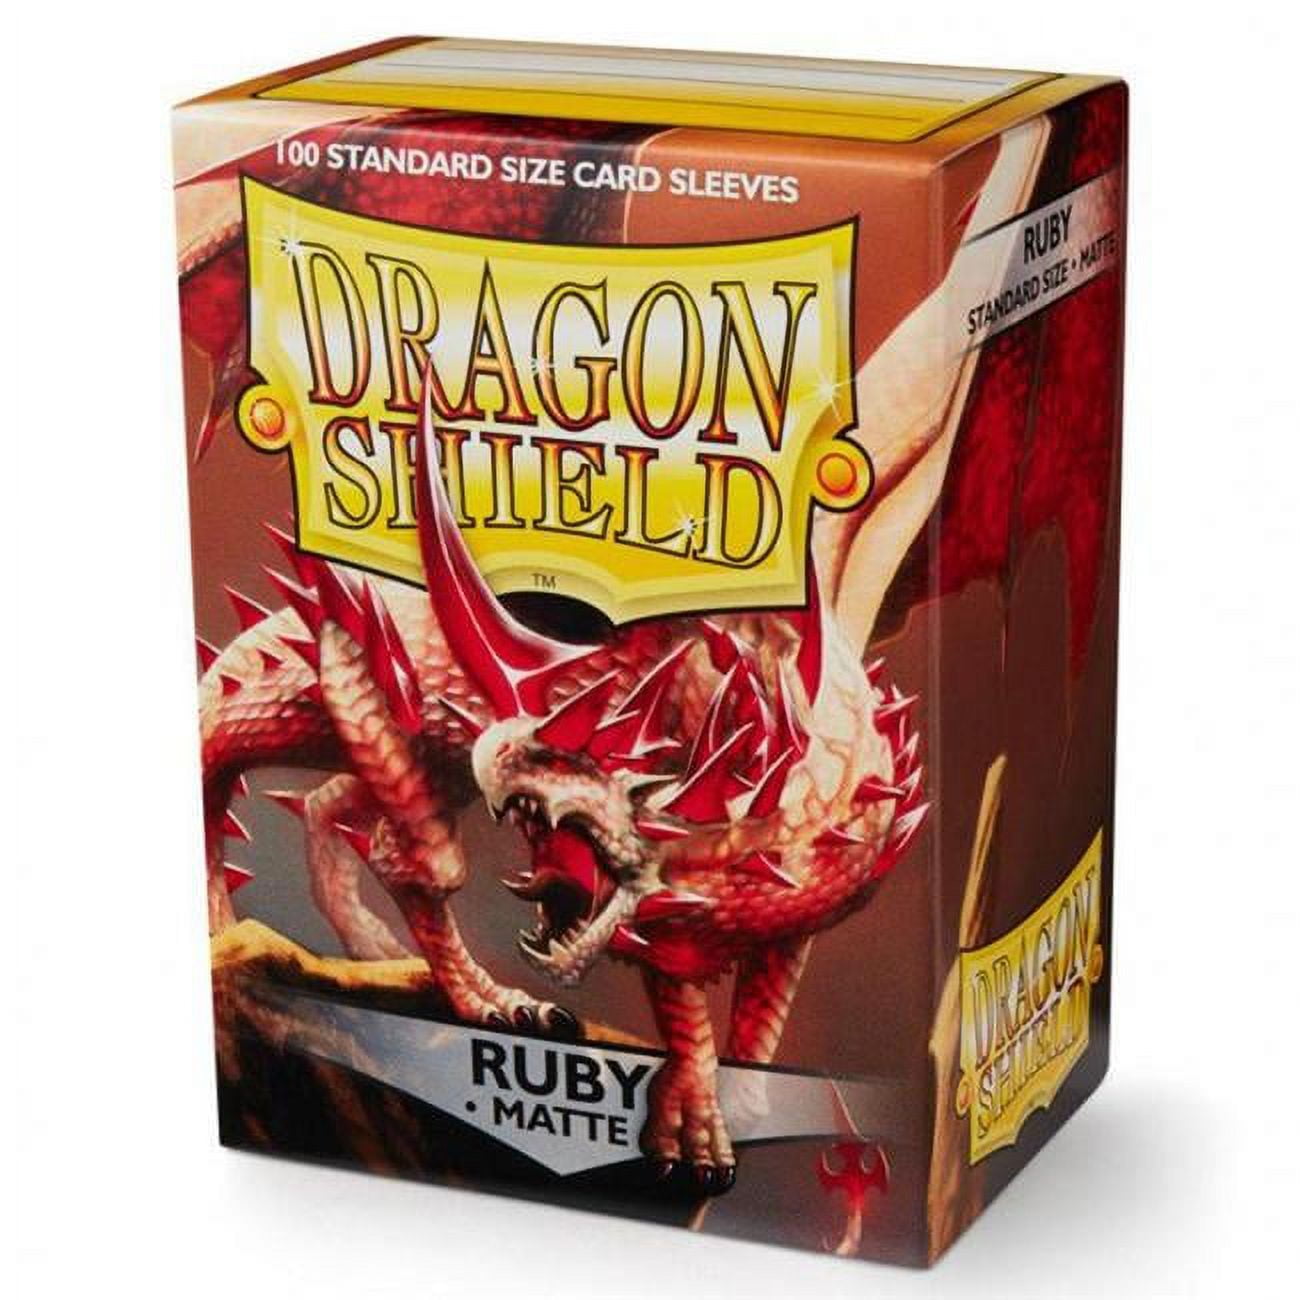 Picture of Arcane Tinmen ATM11037 DP - Dragon Shield Sleeves Playing Cards&#44; Matte Ruby - 100 Sleeves Per Box